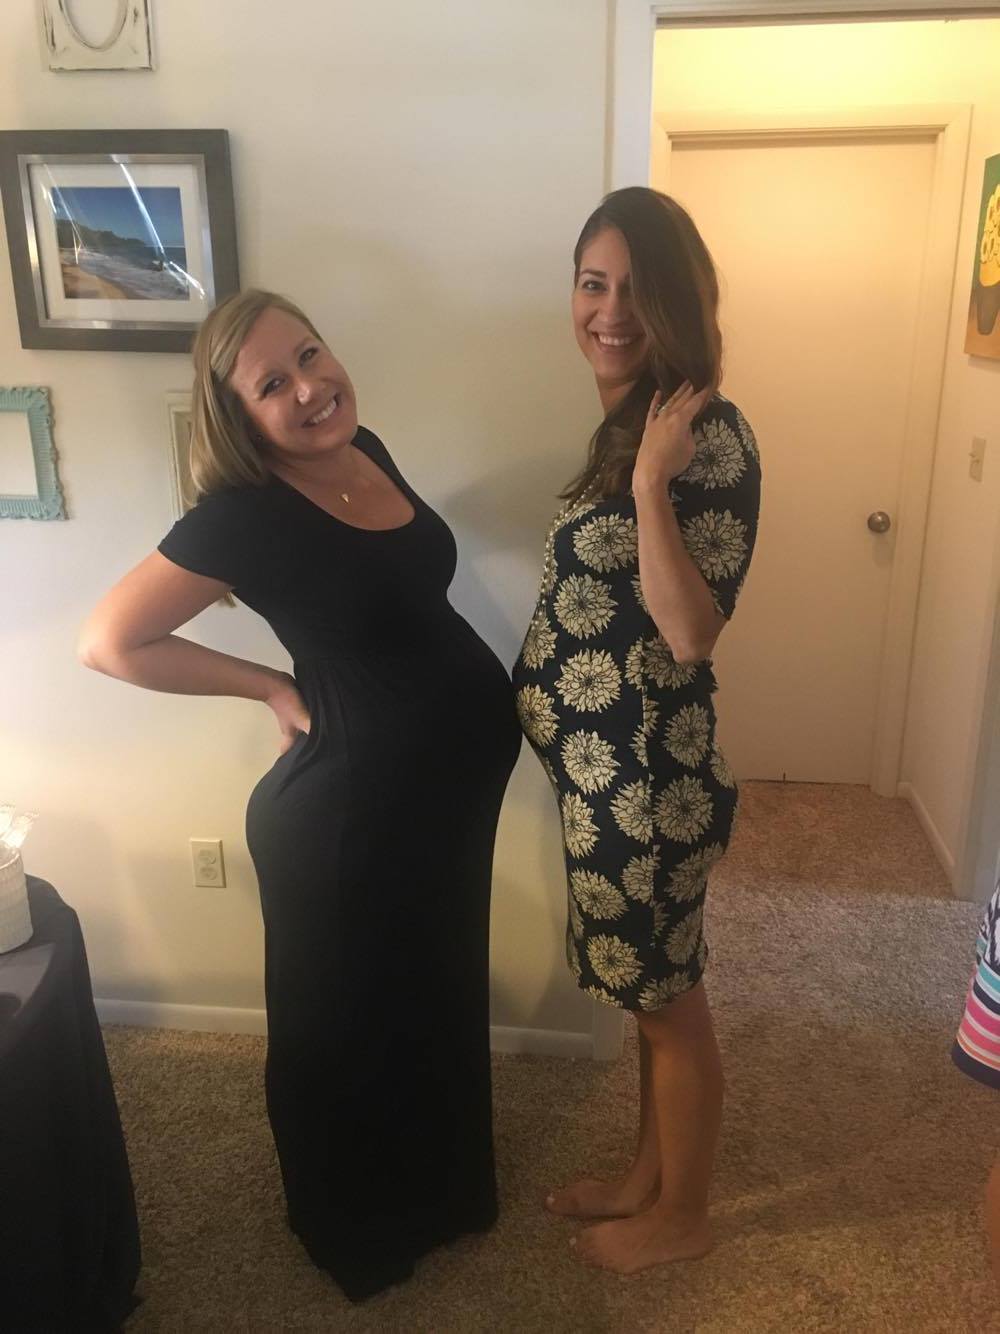 The moms-to-be Michelle McSwain and Jaclyn Campbell proudly show off their baby bellies at 